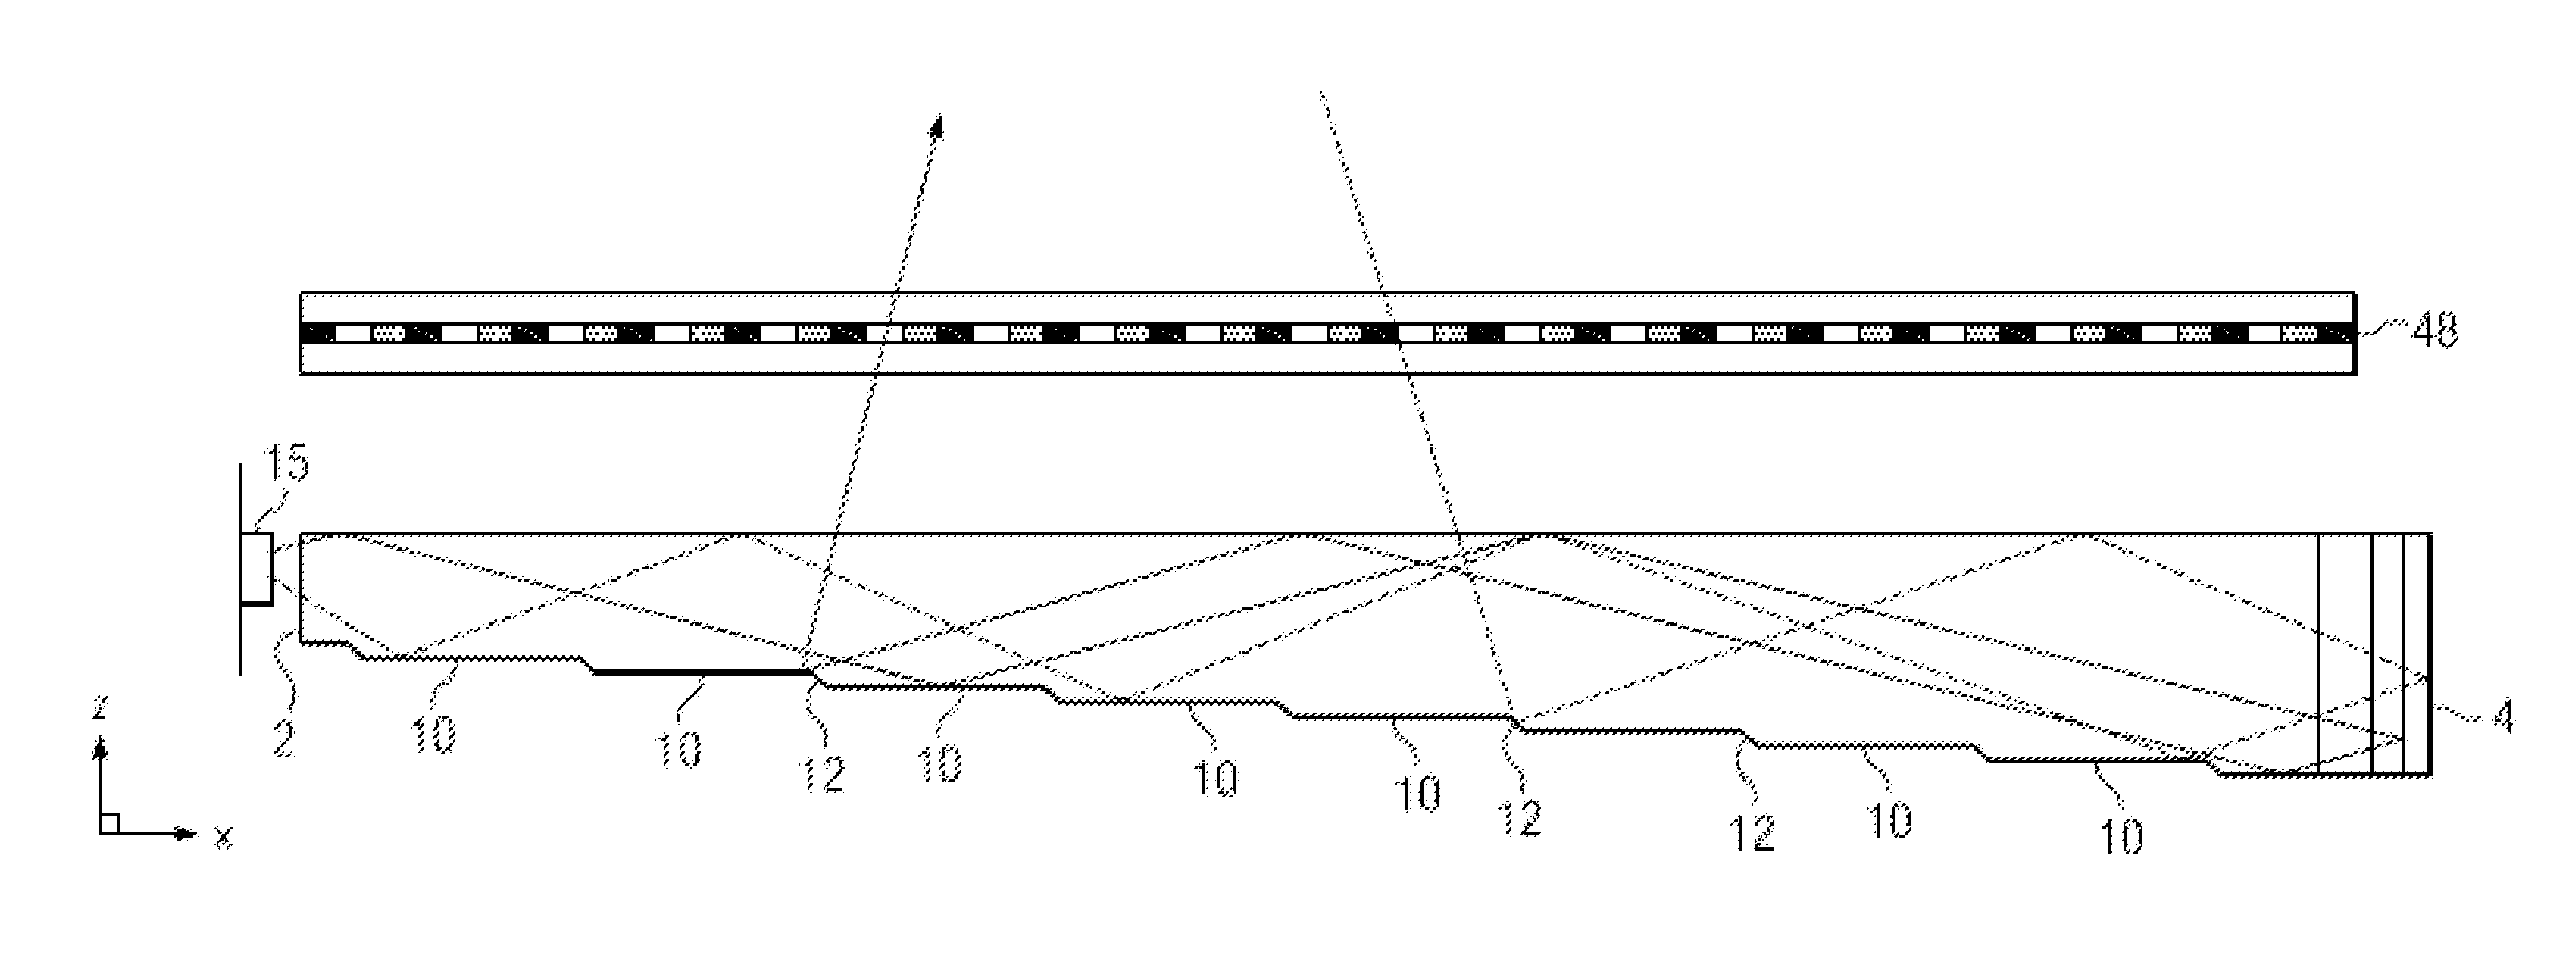 Spatially multiplexed imaging directional backlight displays